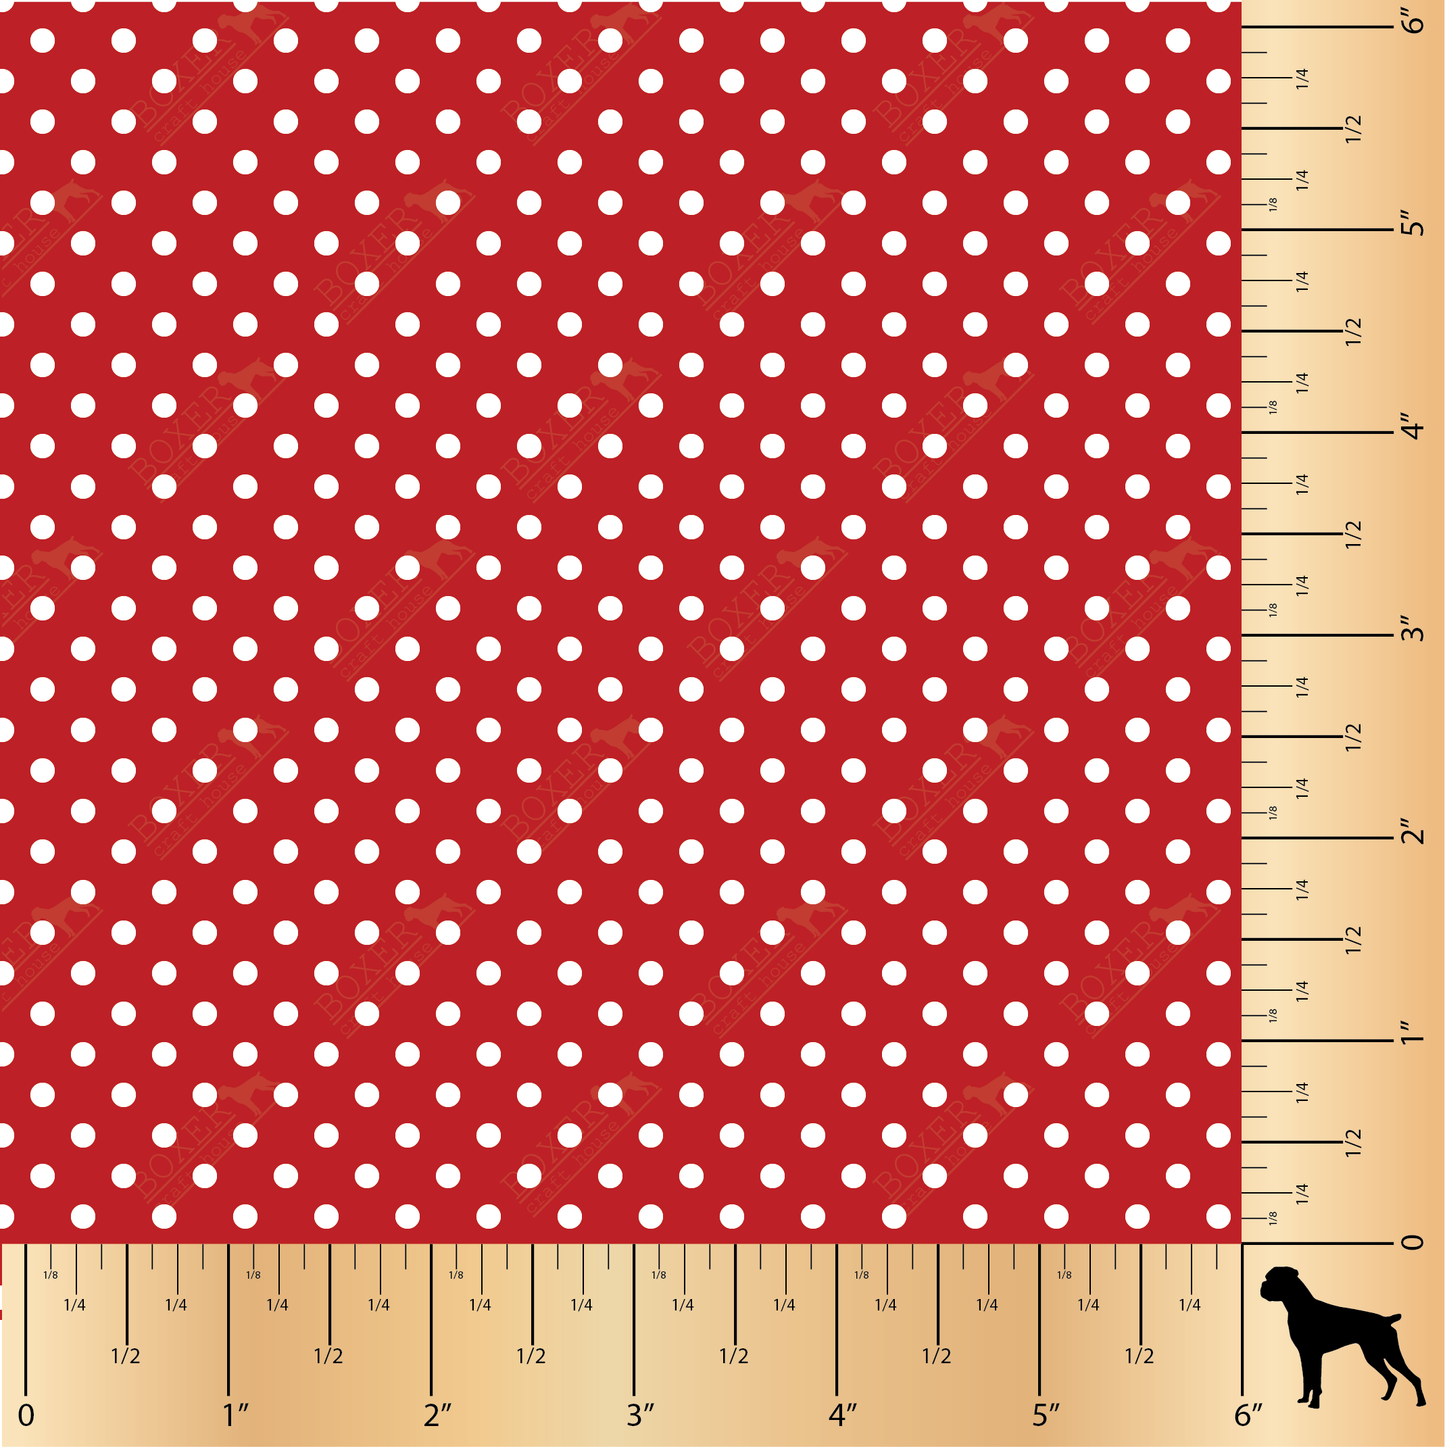 HTV Patterns - Dots - Candy Apple Red 1/8"